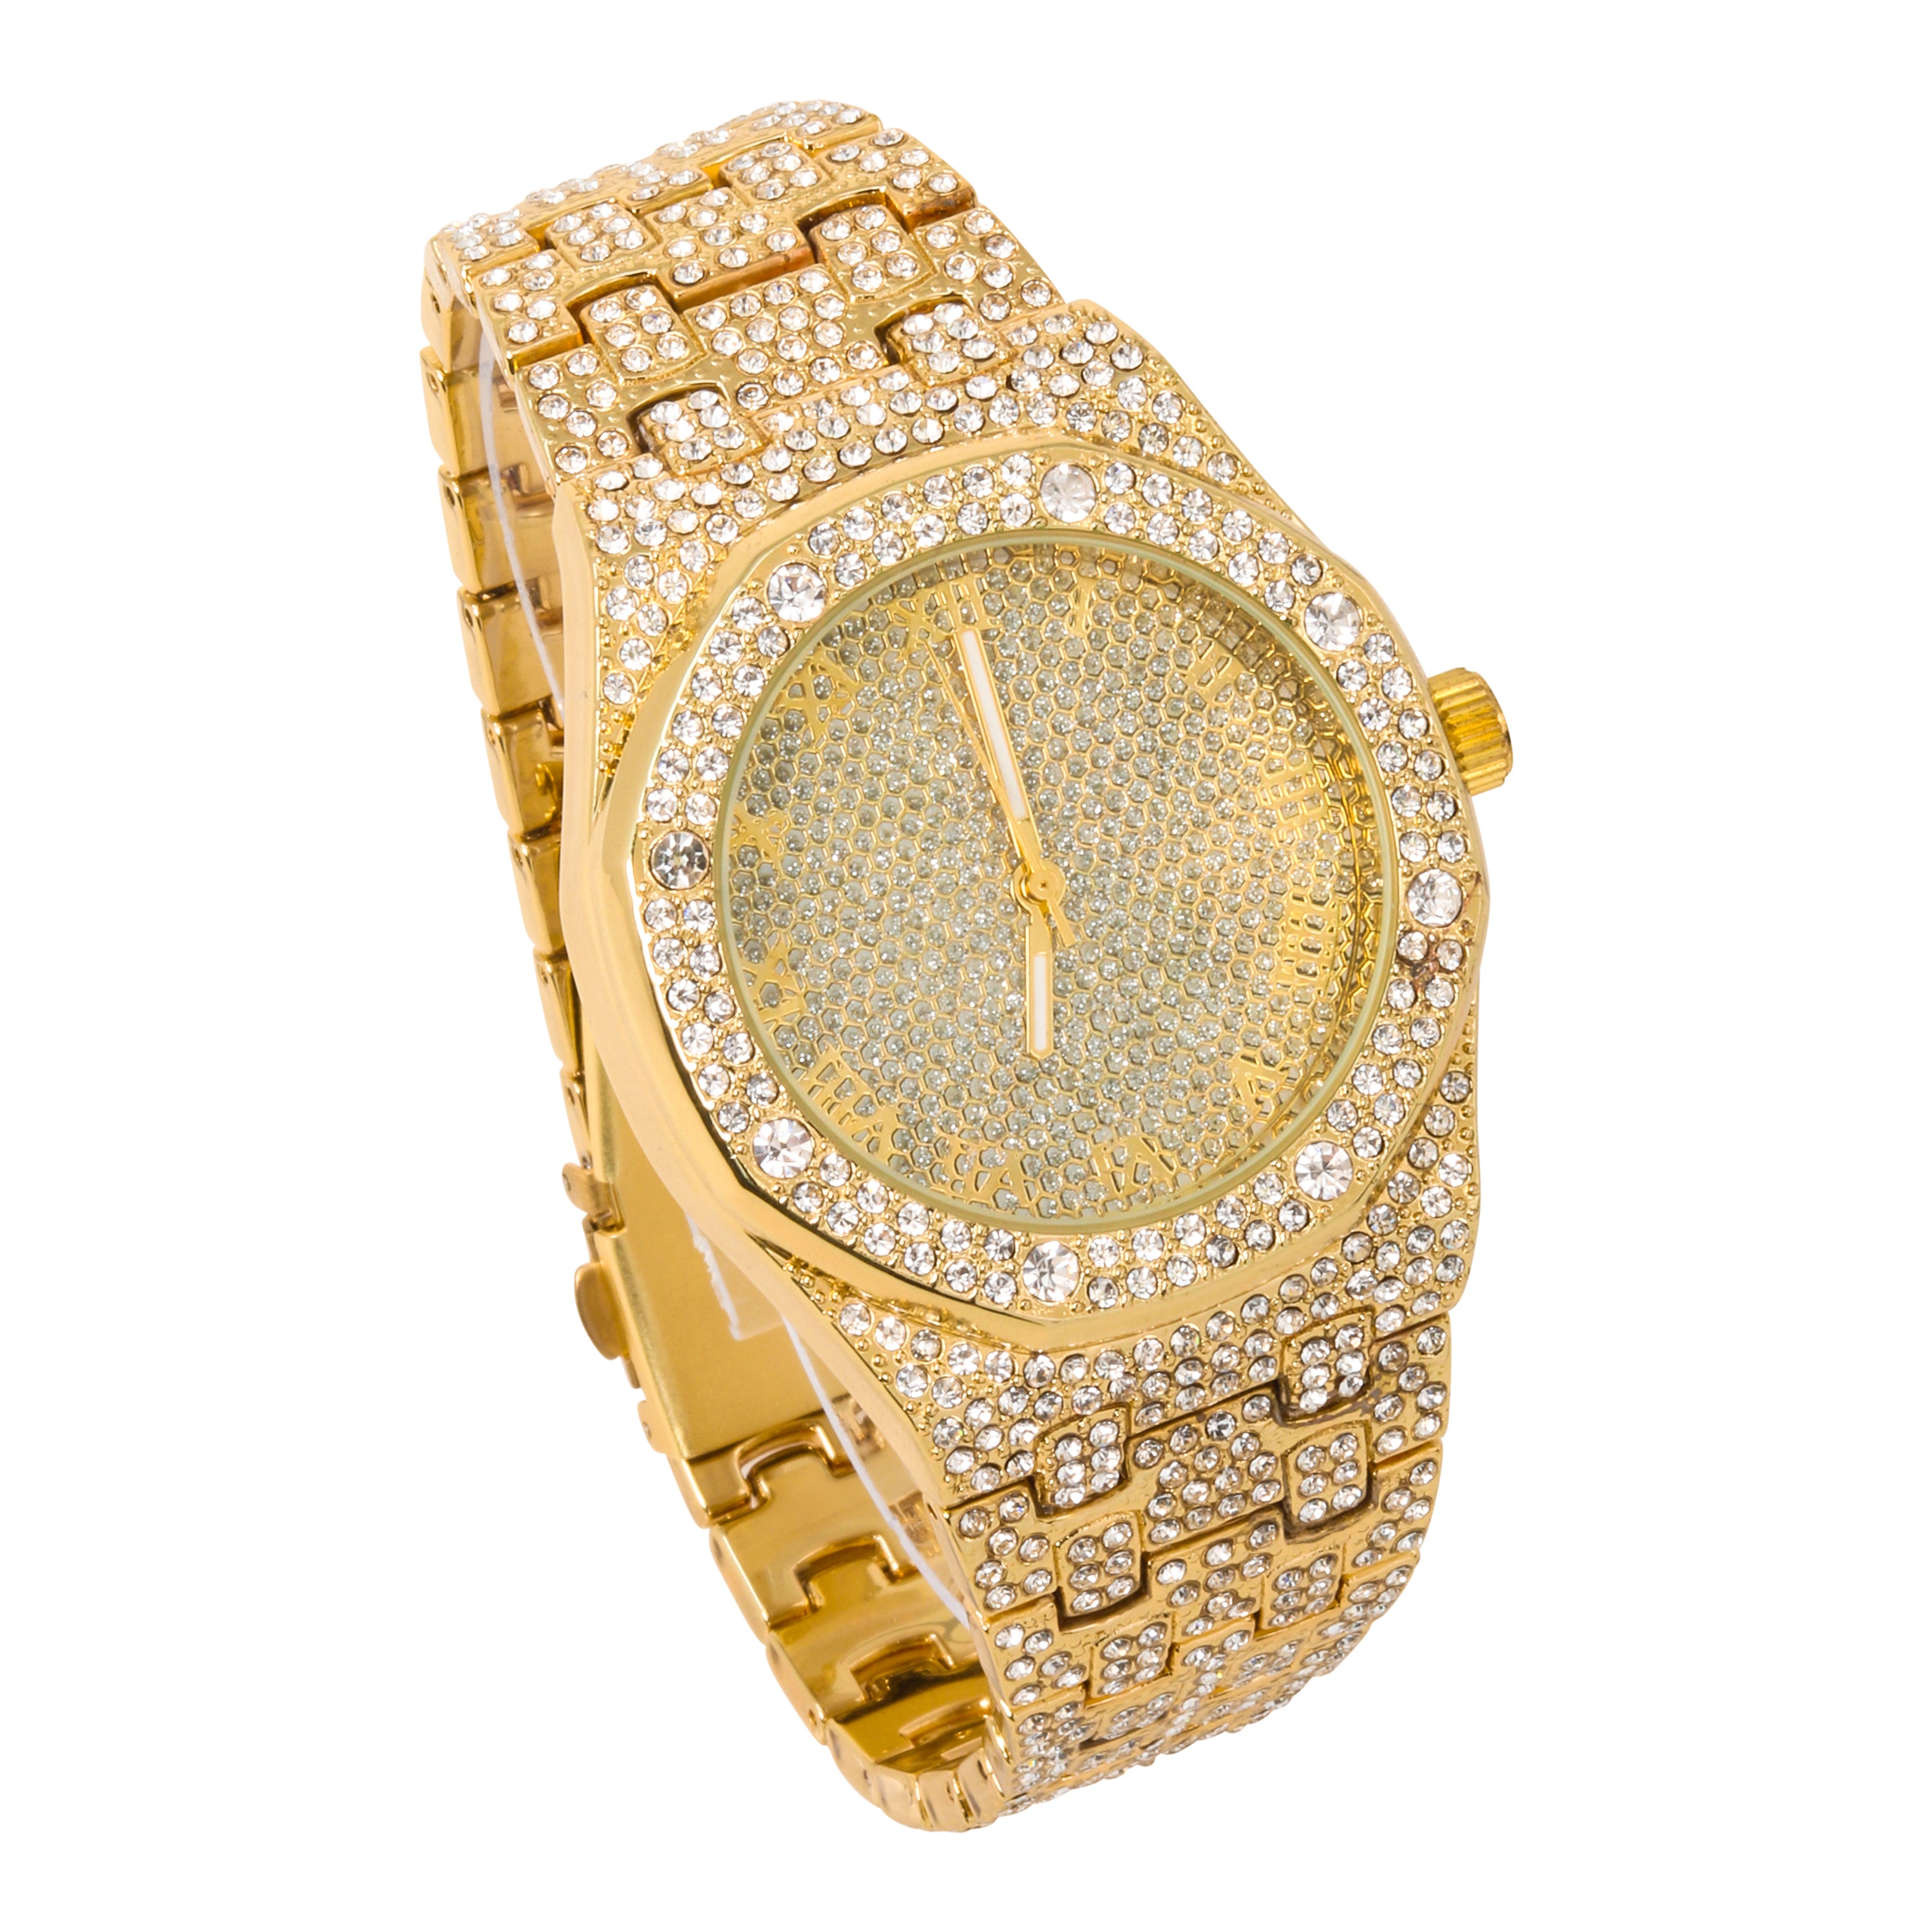 Men's 40mm Gold Octagon Bezel - "Fully Iced Out Watch"